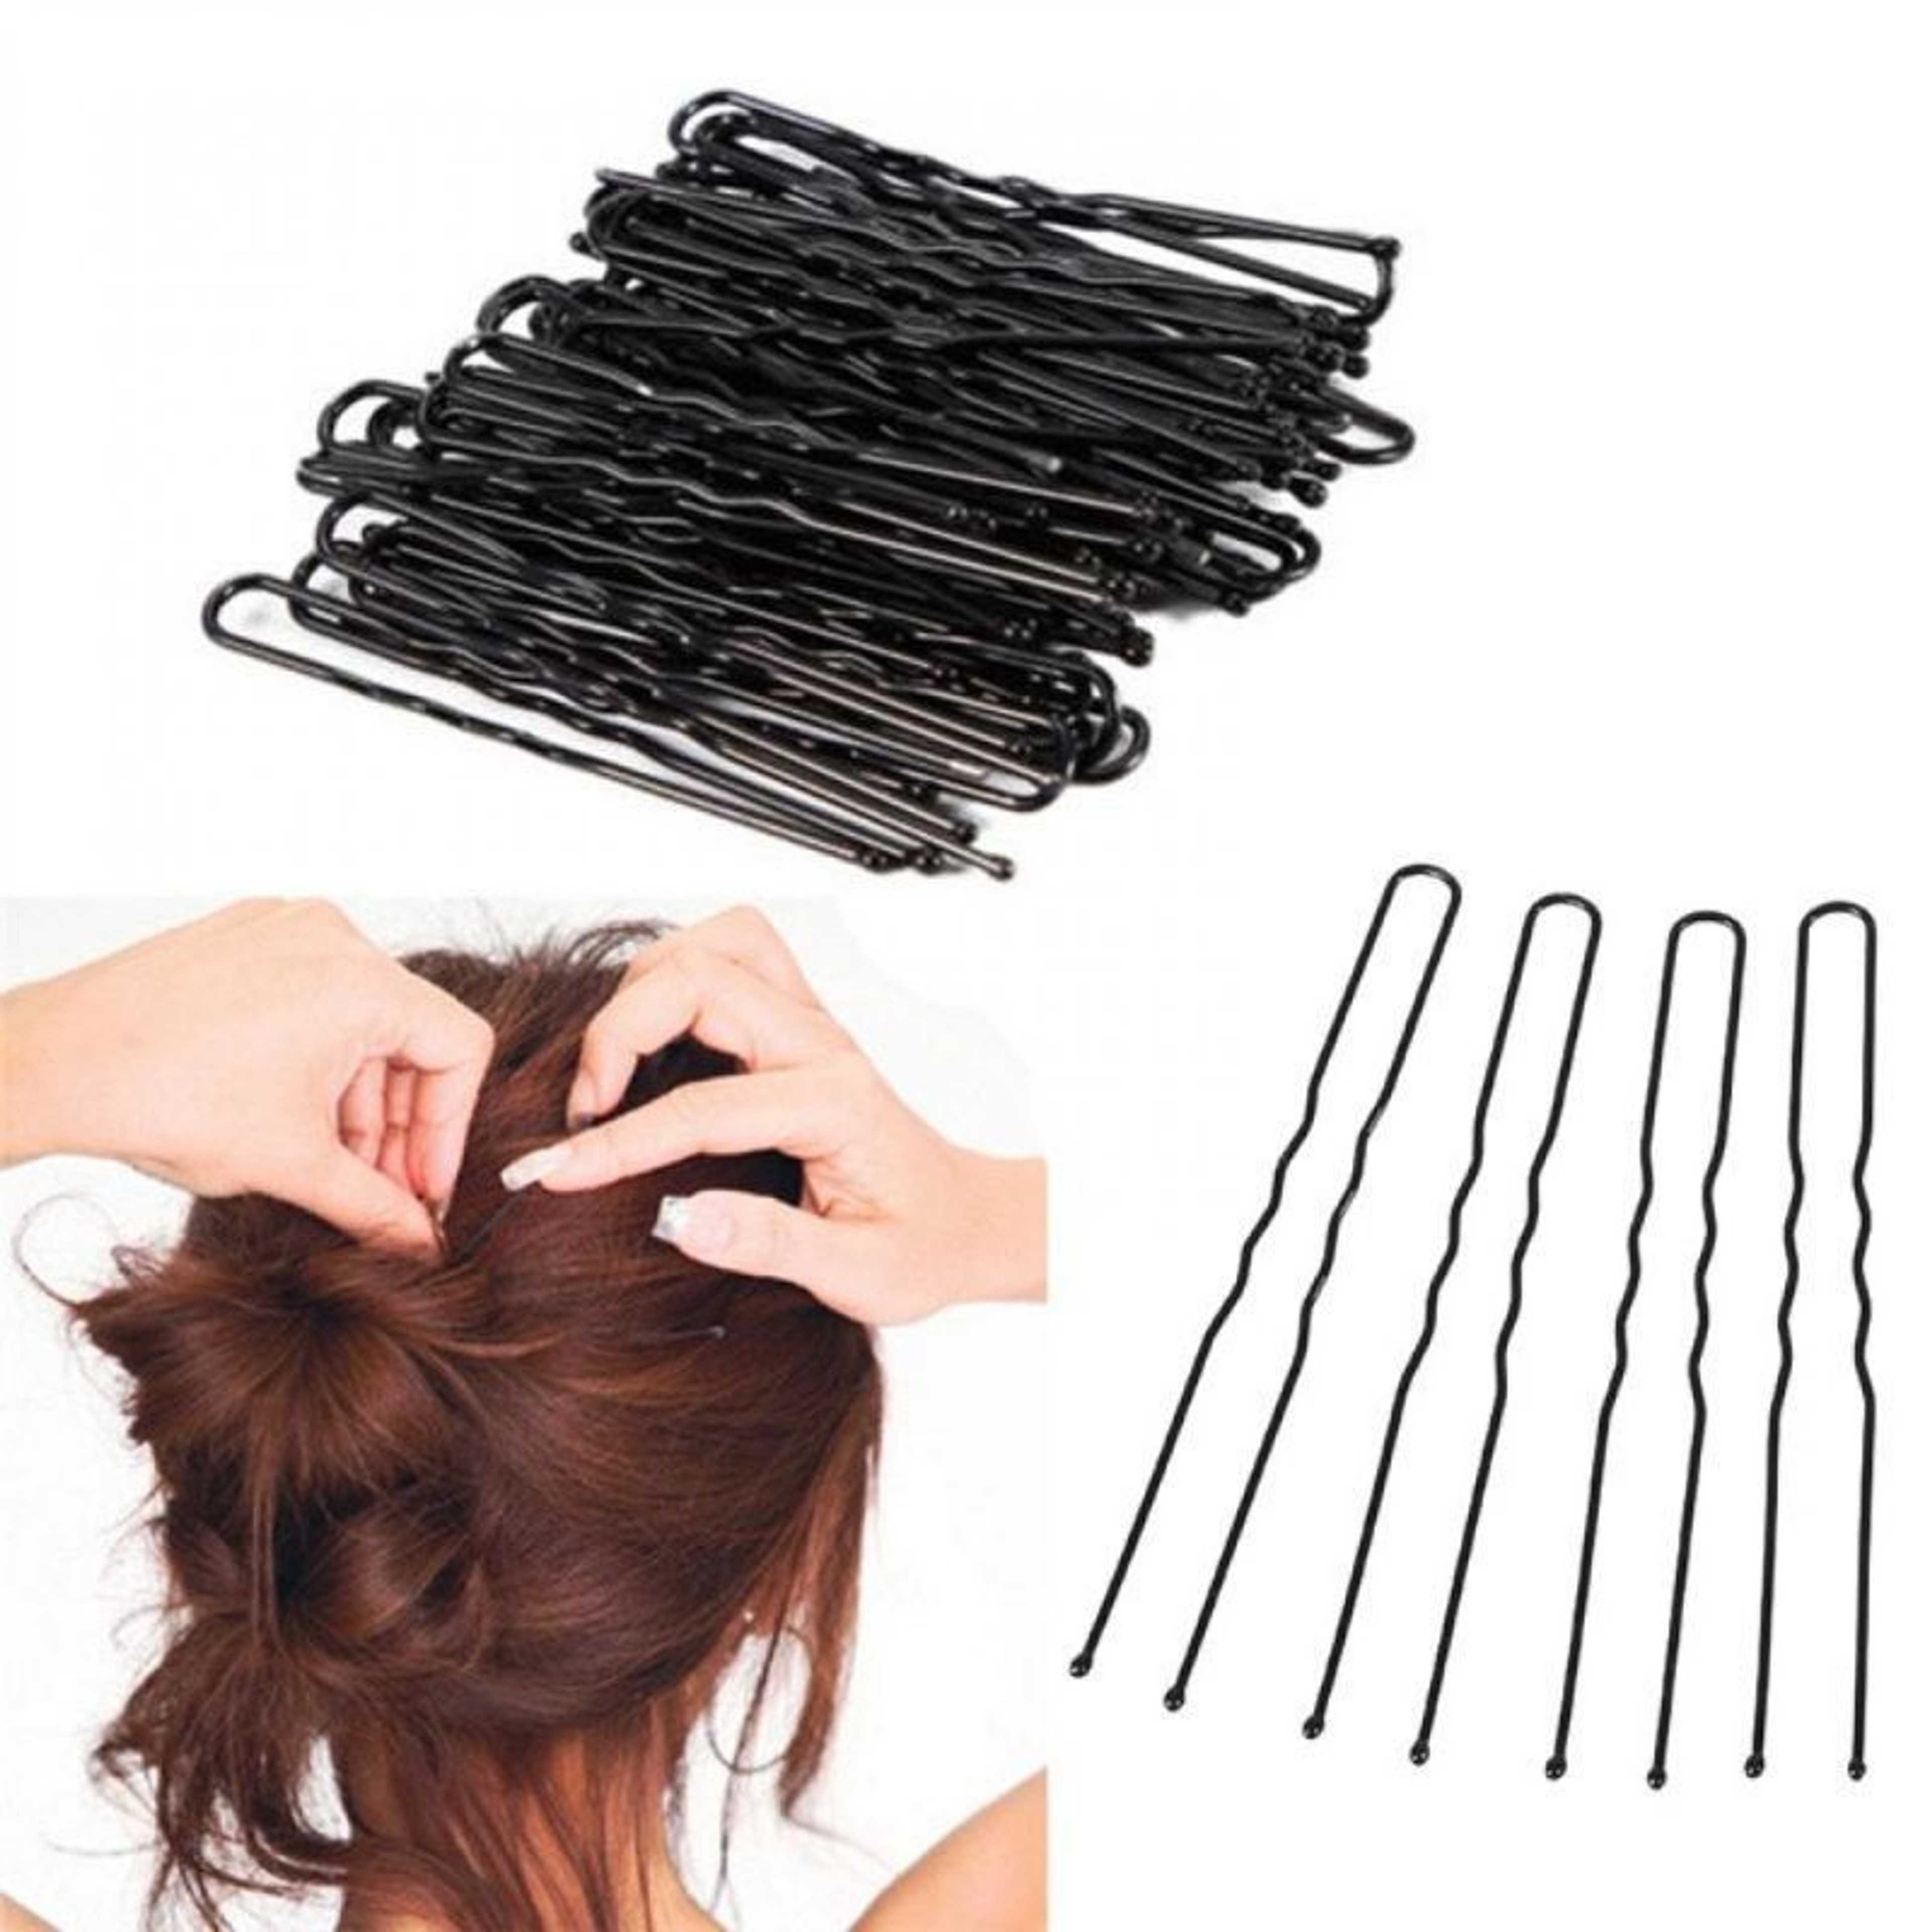 24pc U-Shape Hair Bobby Pin For Hairstyling Women Up-do Hair Pins In Strong Metal Material DIY Hair Clips